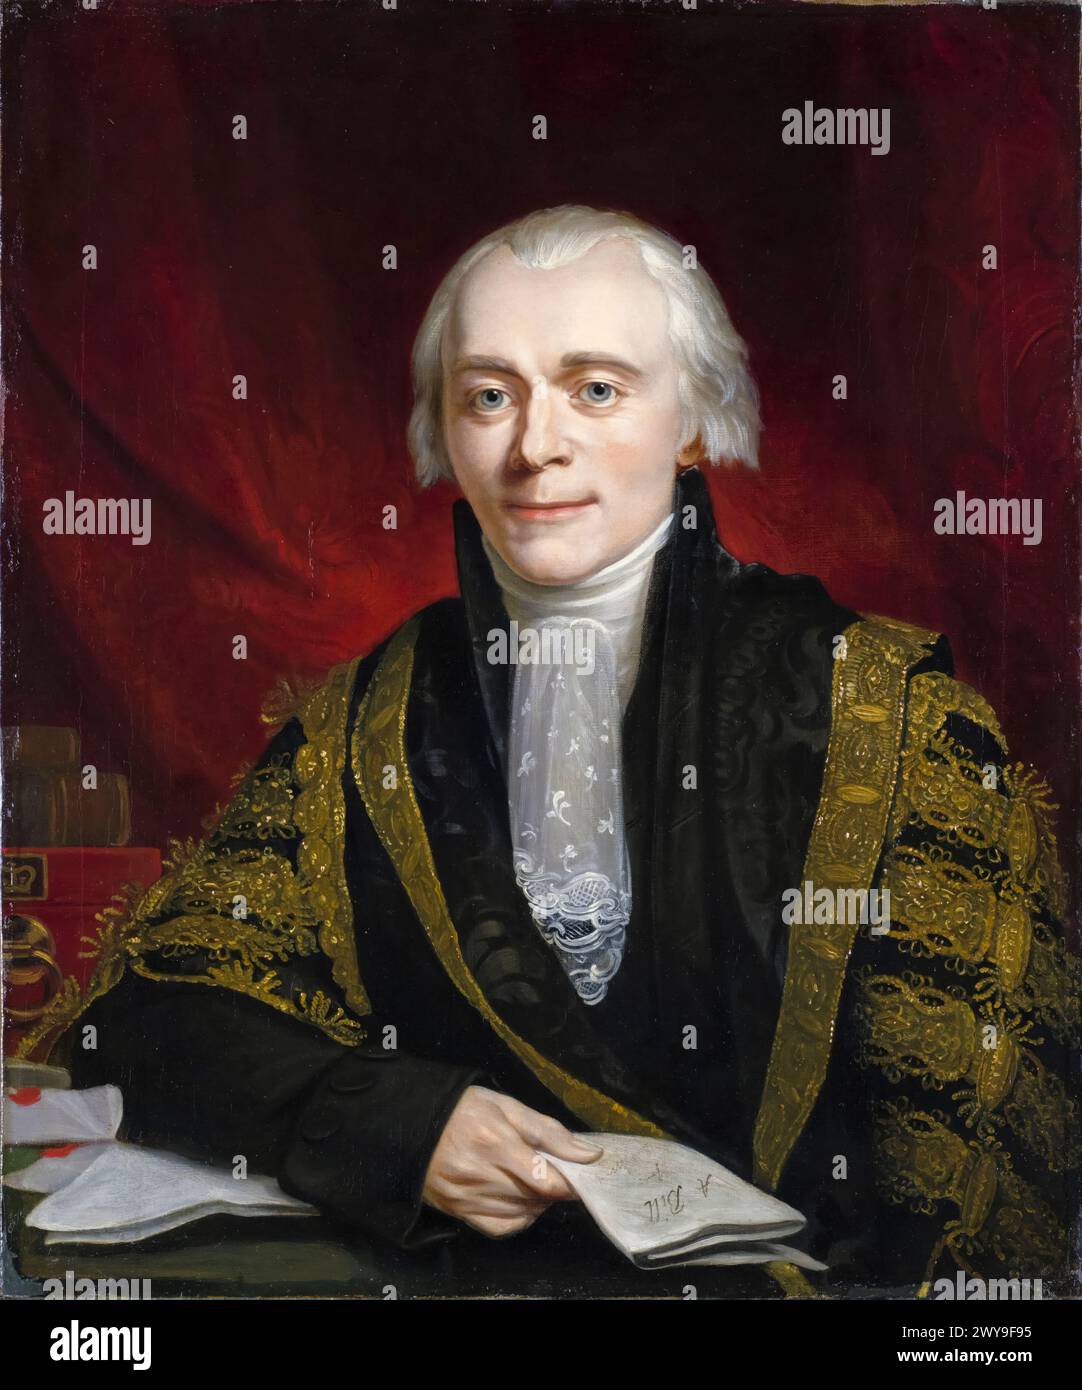 Spencer Perceval (1762-1812), Prime Minister of the United Kingdom from October 1809 until his assassination in May 1812, portrait painting in oil on canvas by George Francis Joseph, 1816 Stock Photo